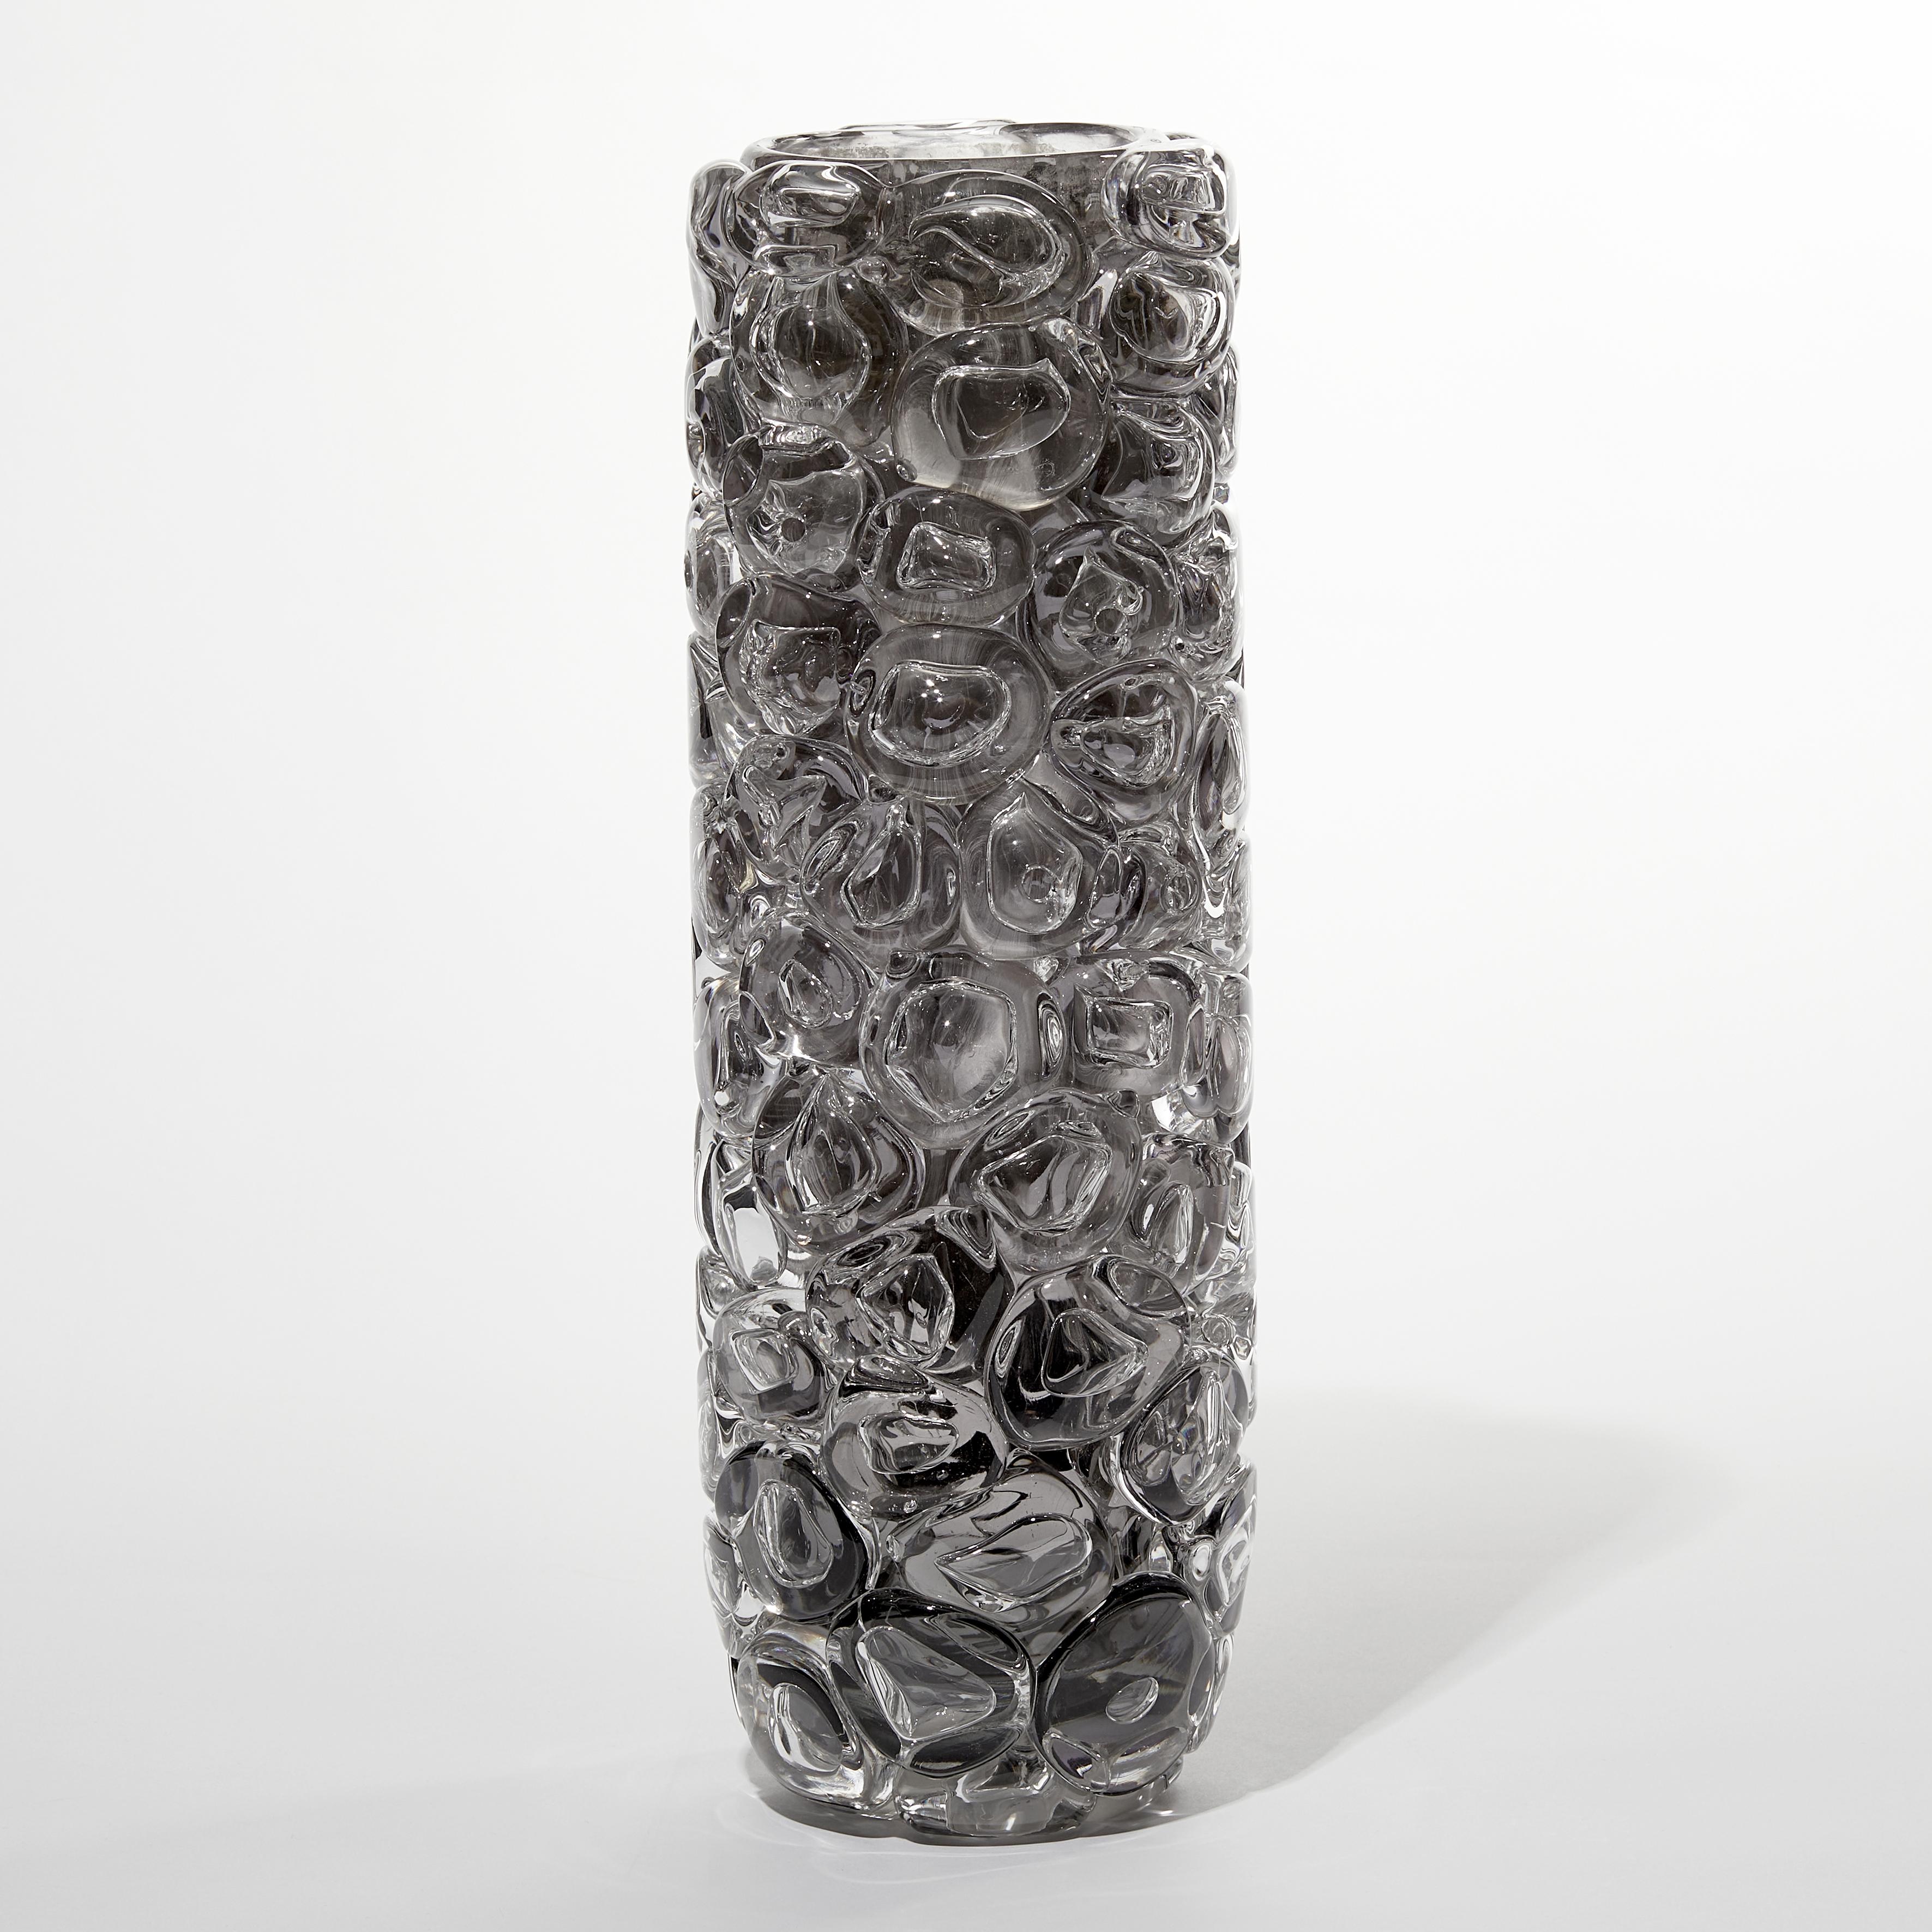 Bubblewrap in Monochrome II, a Silver and Clear Glass Vase by Allister Malcolm 1